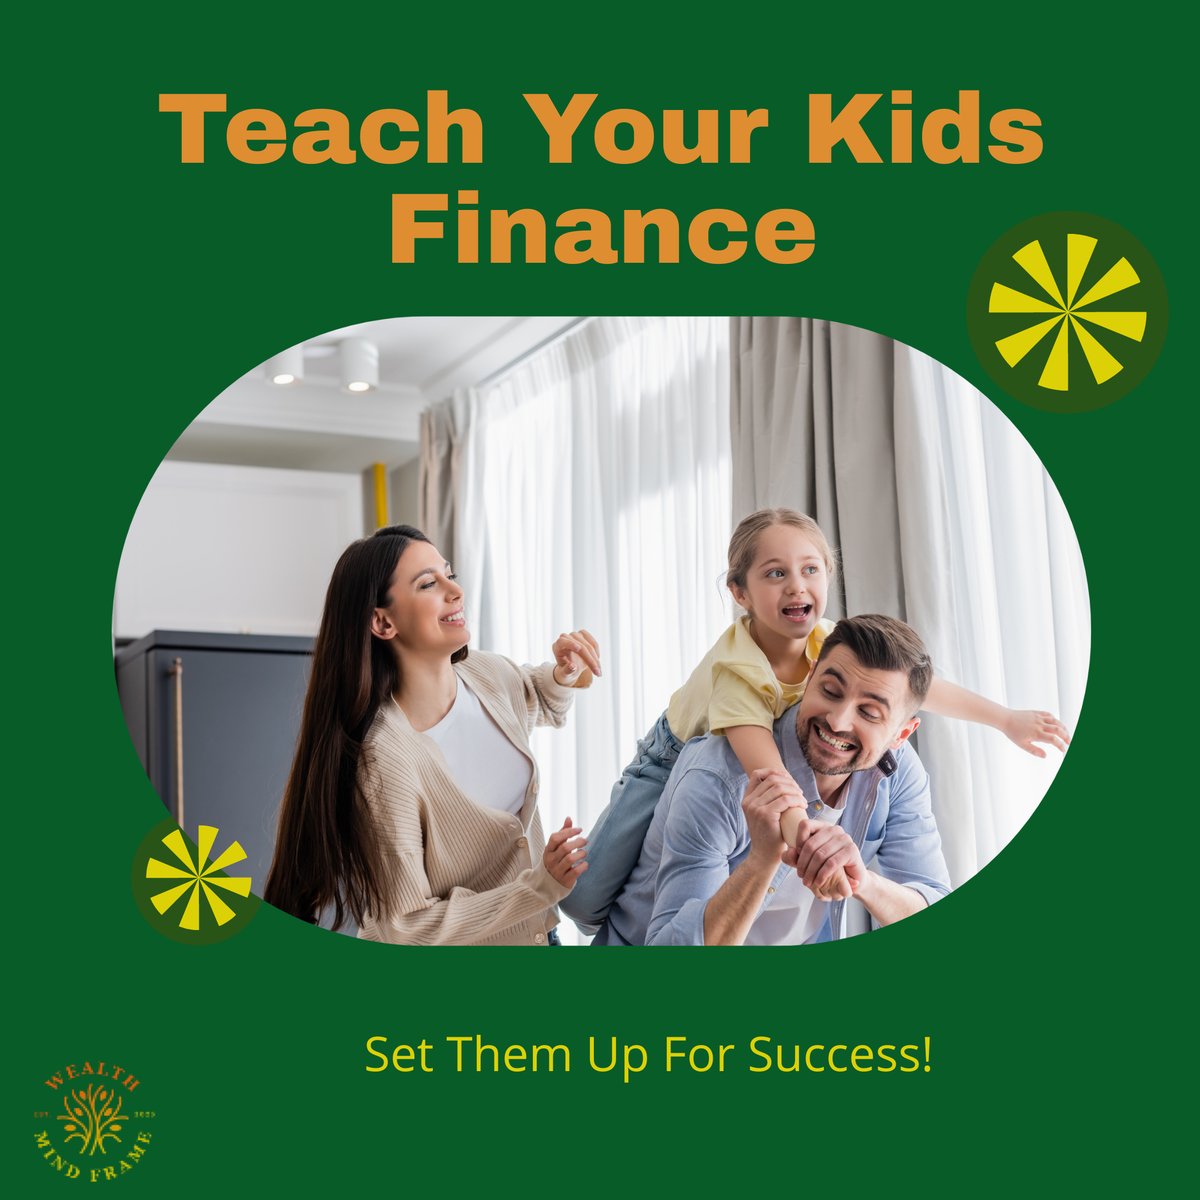 Early financial education sets kids up for success. Teach budgeting, saving, and investing basics. It's never too early to build a strong financial foundation! #FinancialLiteracy #GenerationalWealth #TeachThemYoung